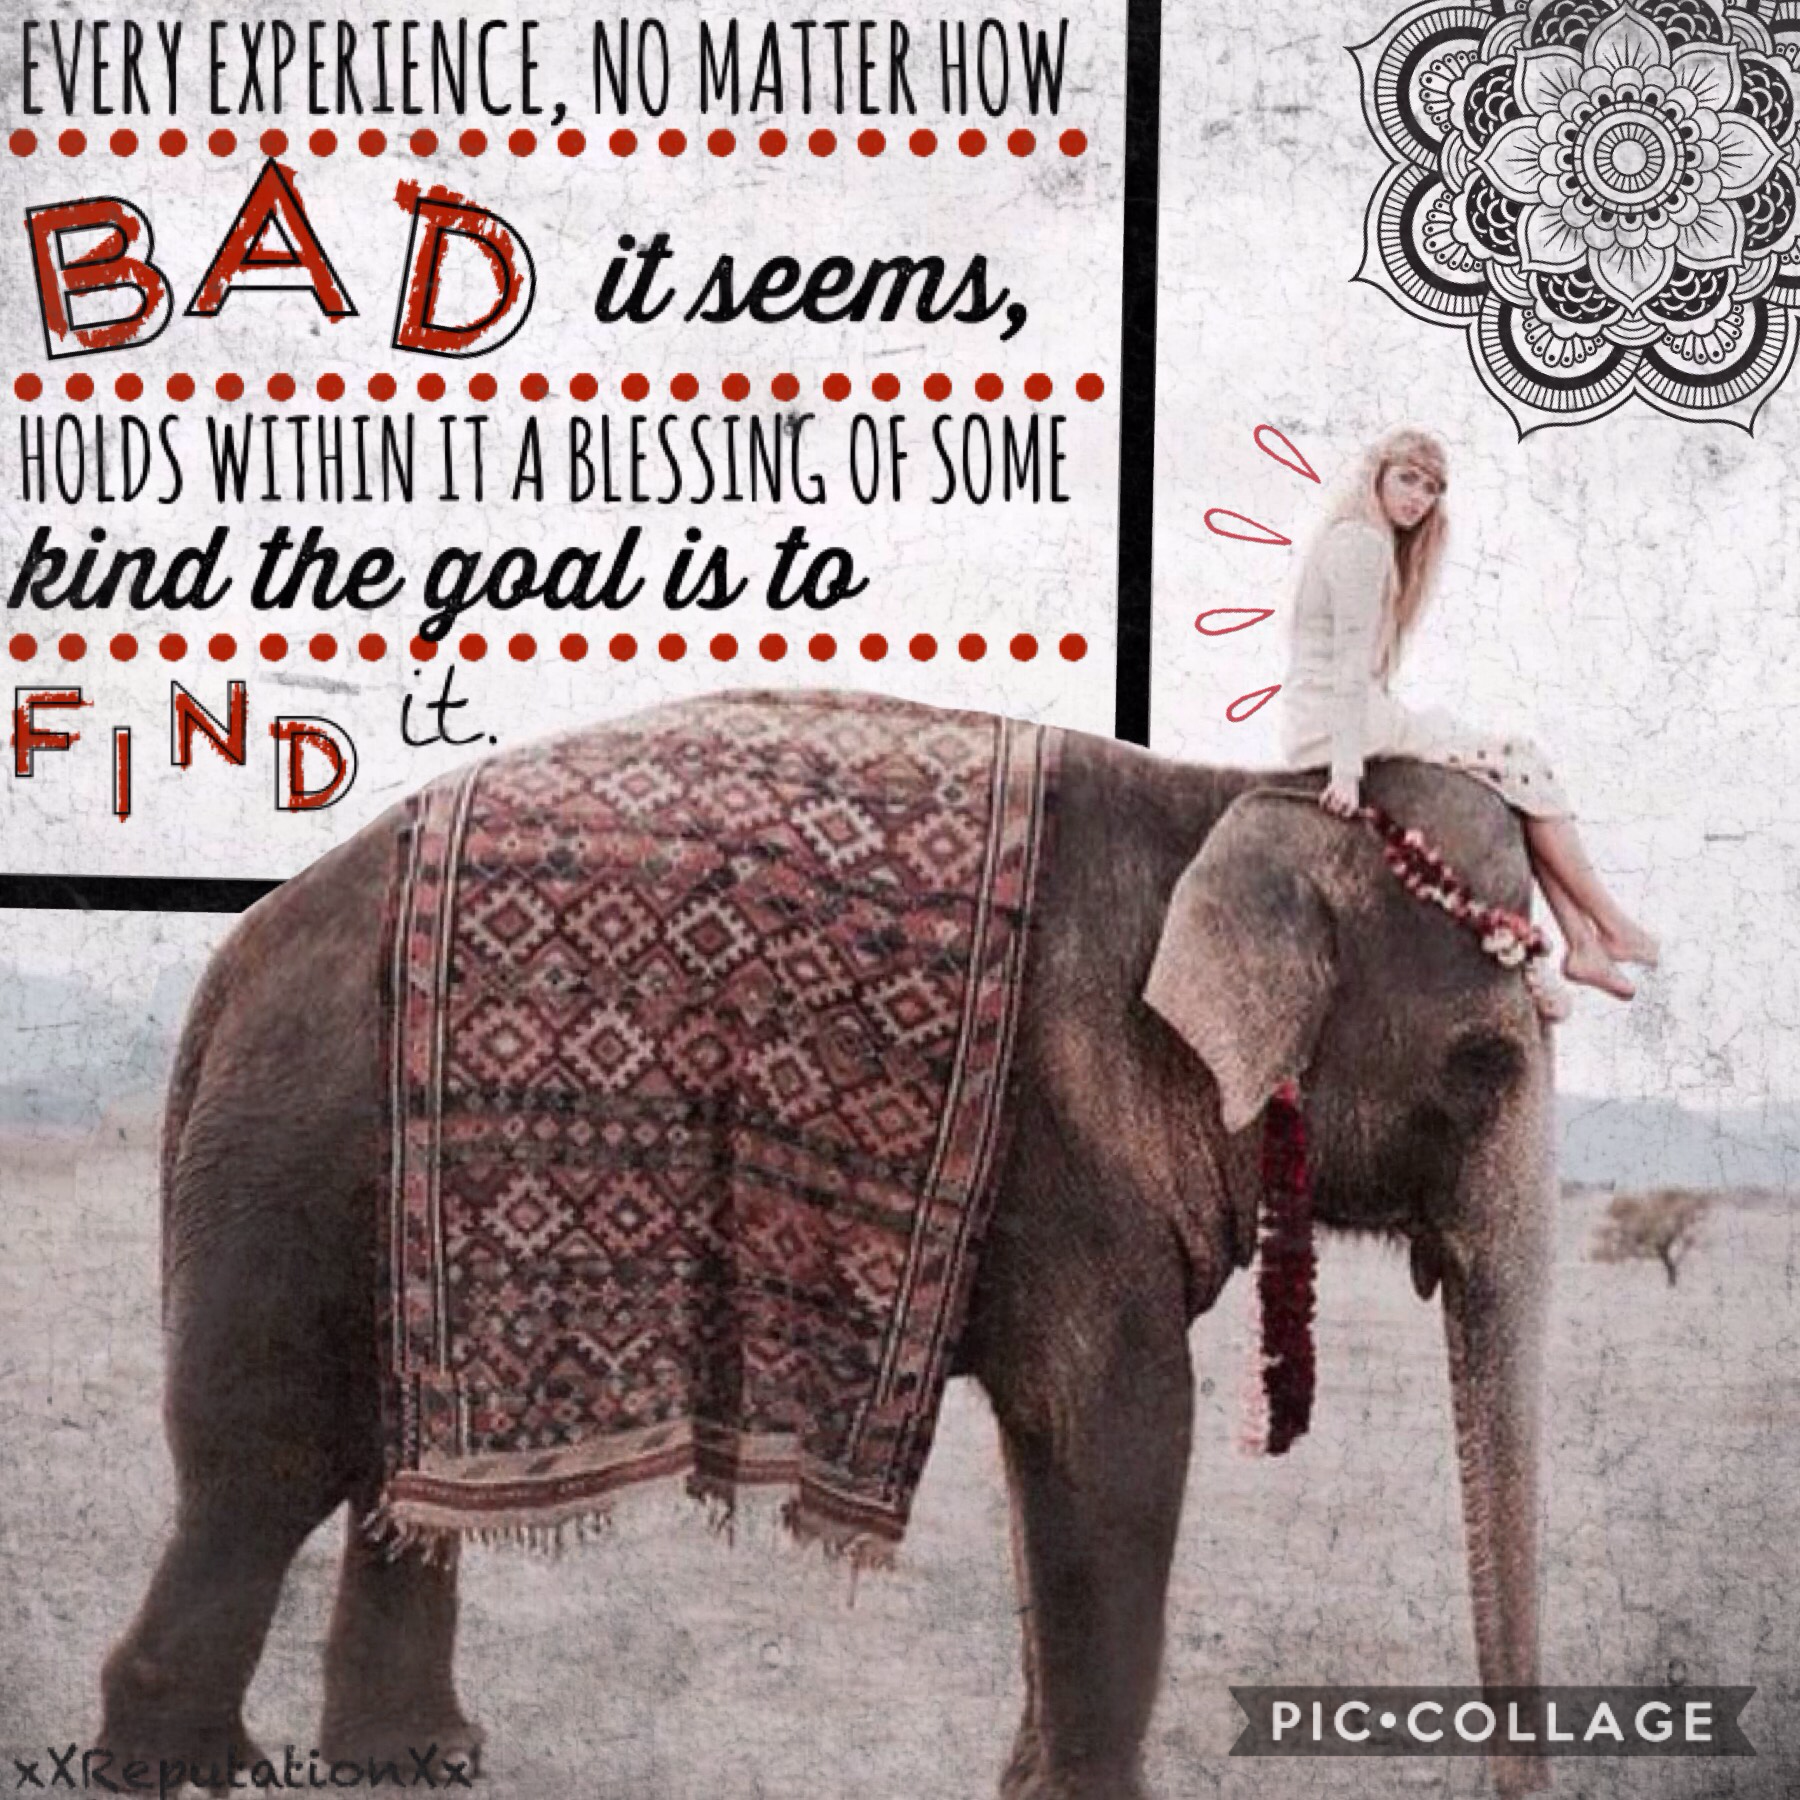 made this for -whiteroses- contest. Tap 💕
QOTD: 🐘 or 🐪
AOTD: 🐘